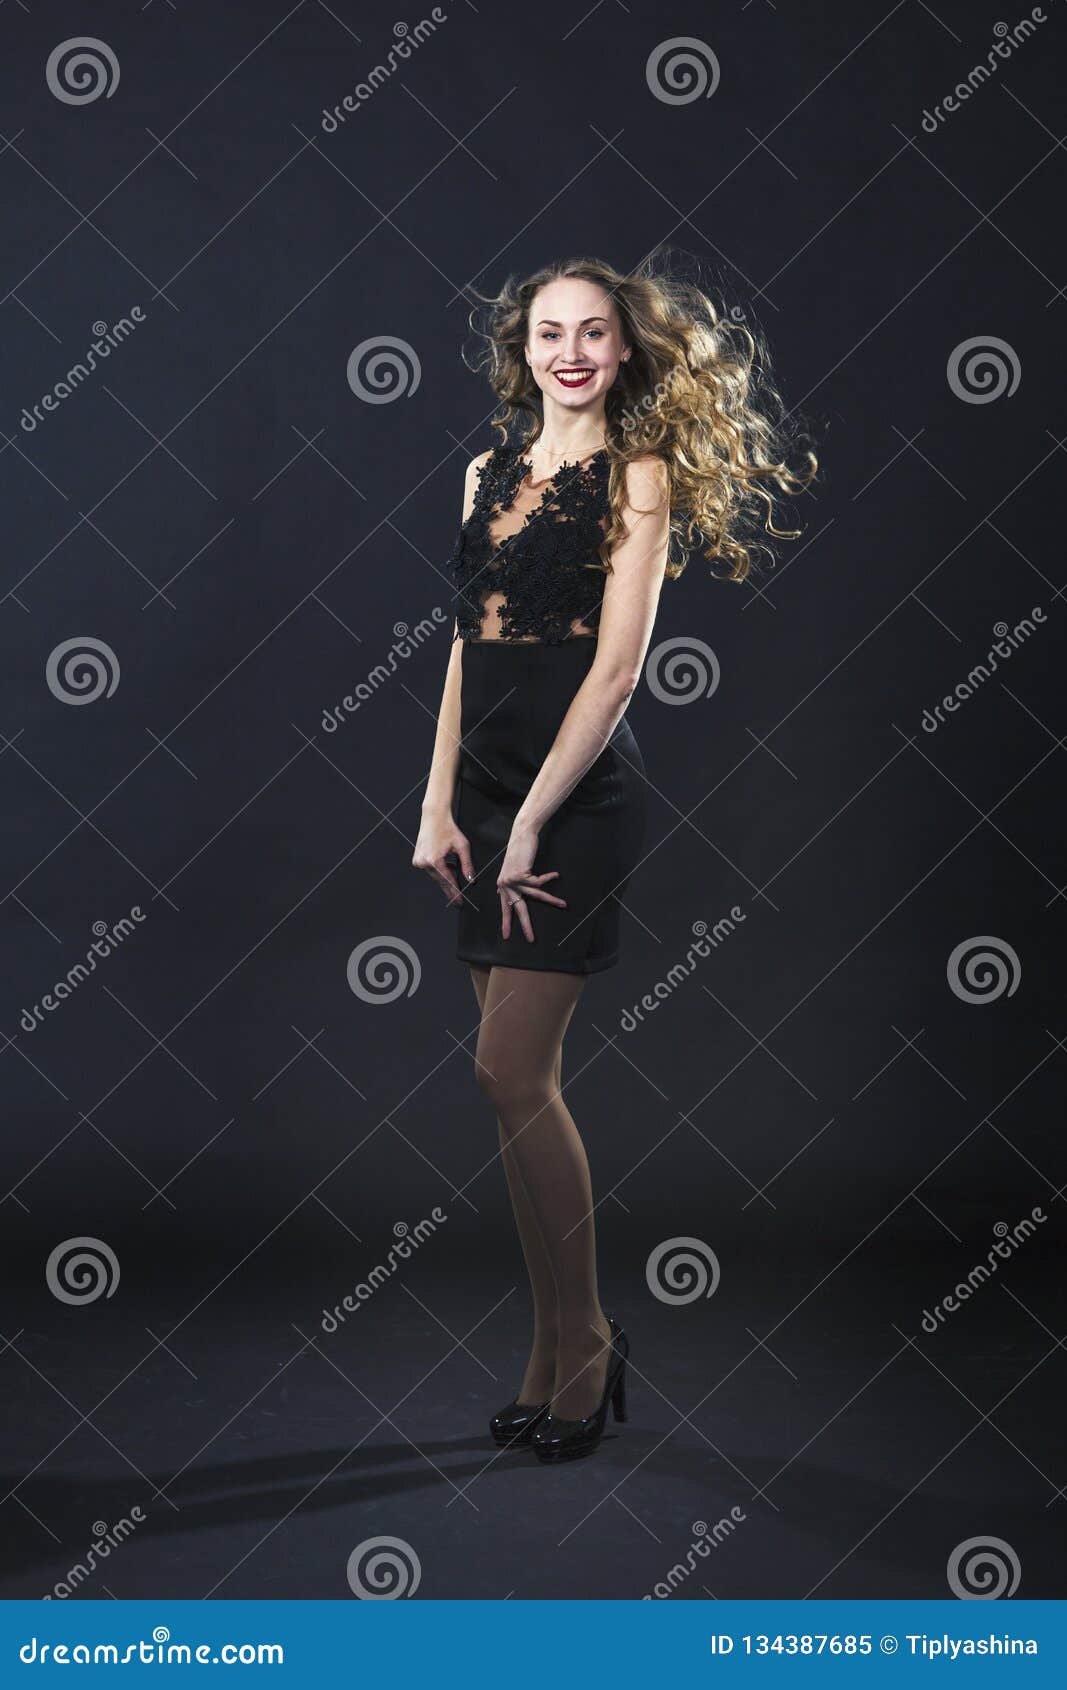 Portrait of a Smiling Young Girl in a Lace Dress on a Black Background ...